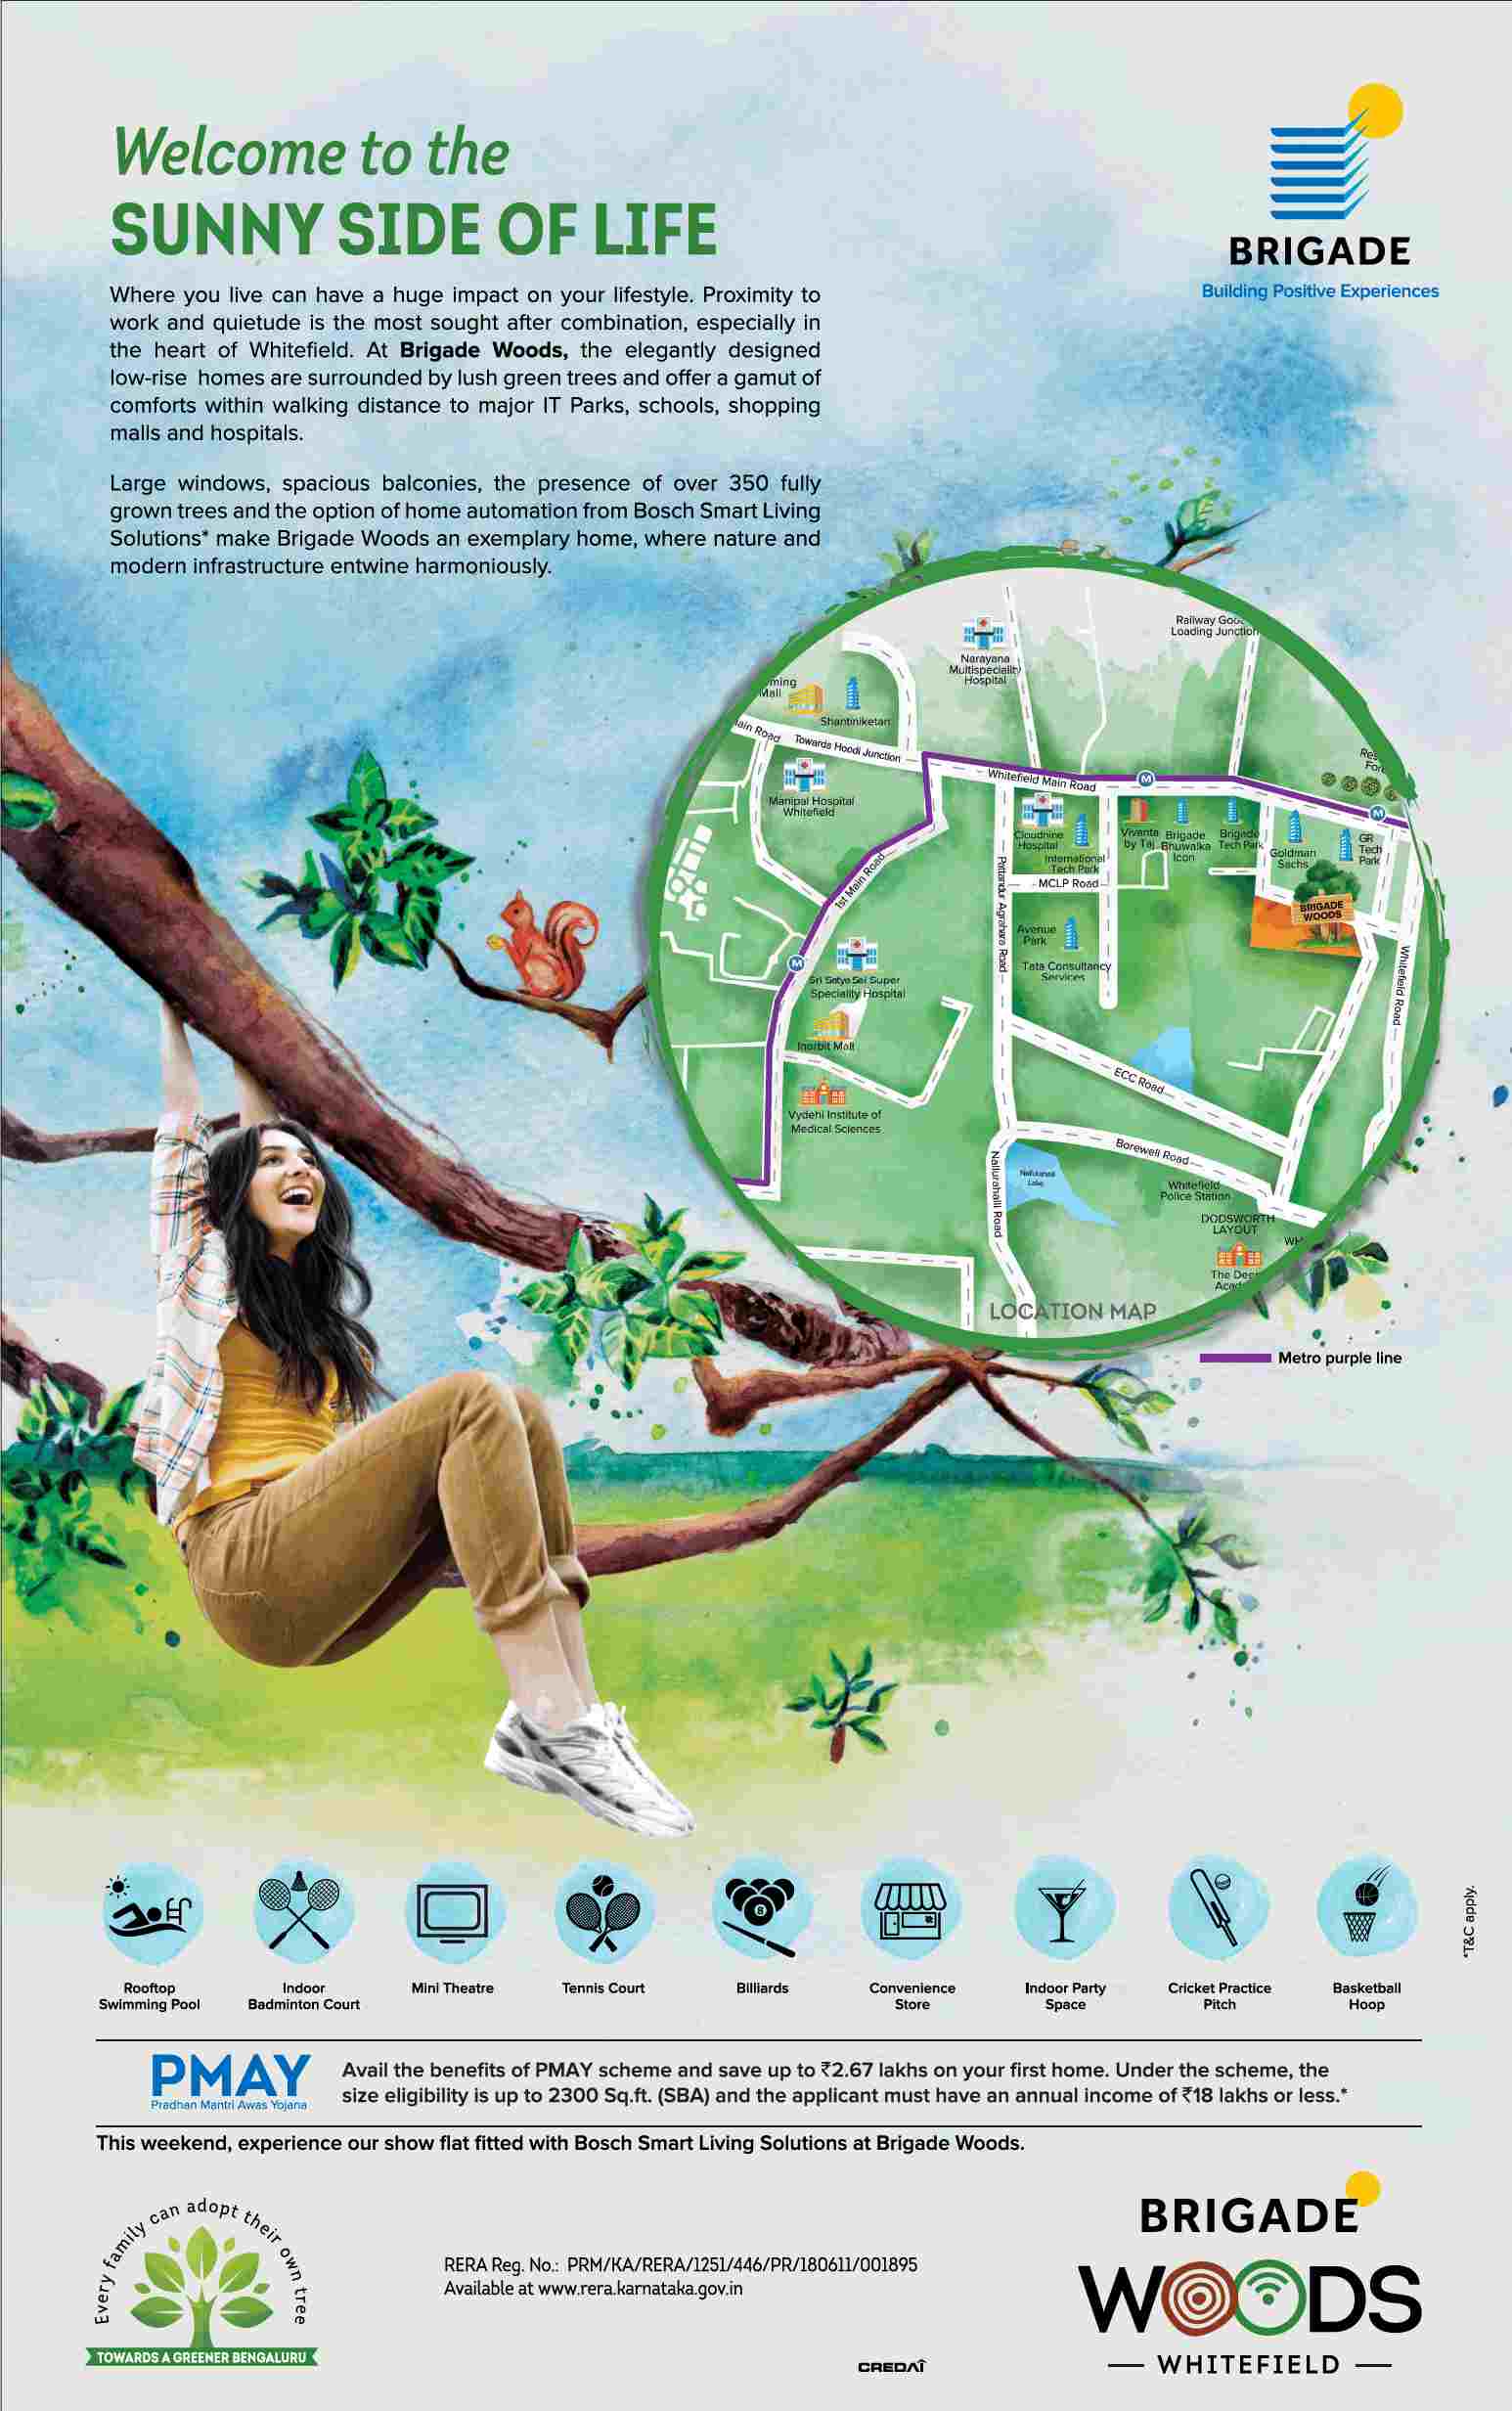 Avail the benefits of PMAY scheme & save up to Rs. 2.67 lakhs at Brigade Woods in Bangalore Update